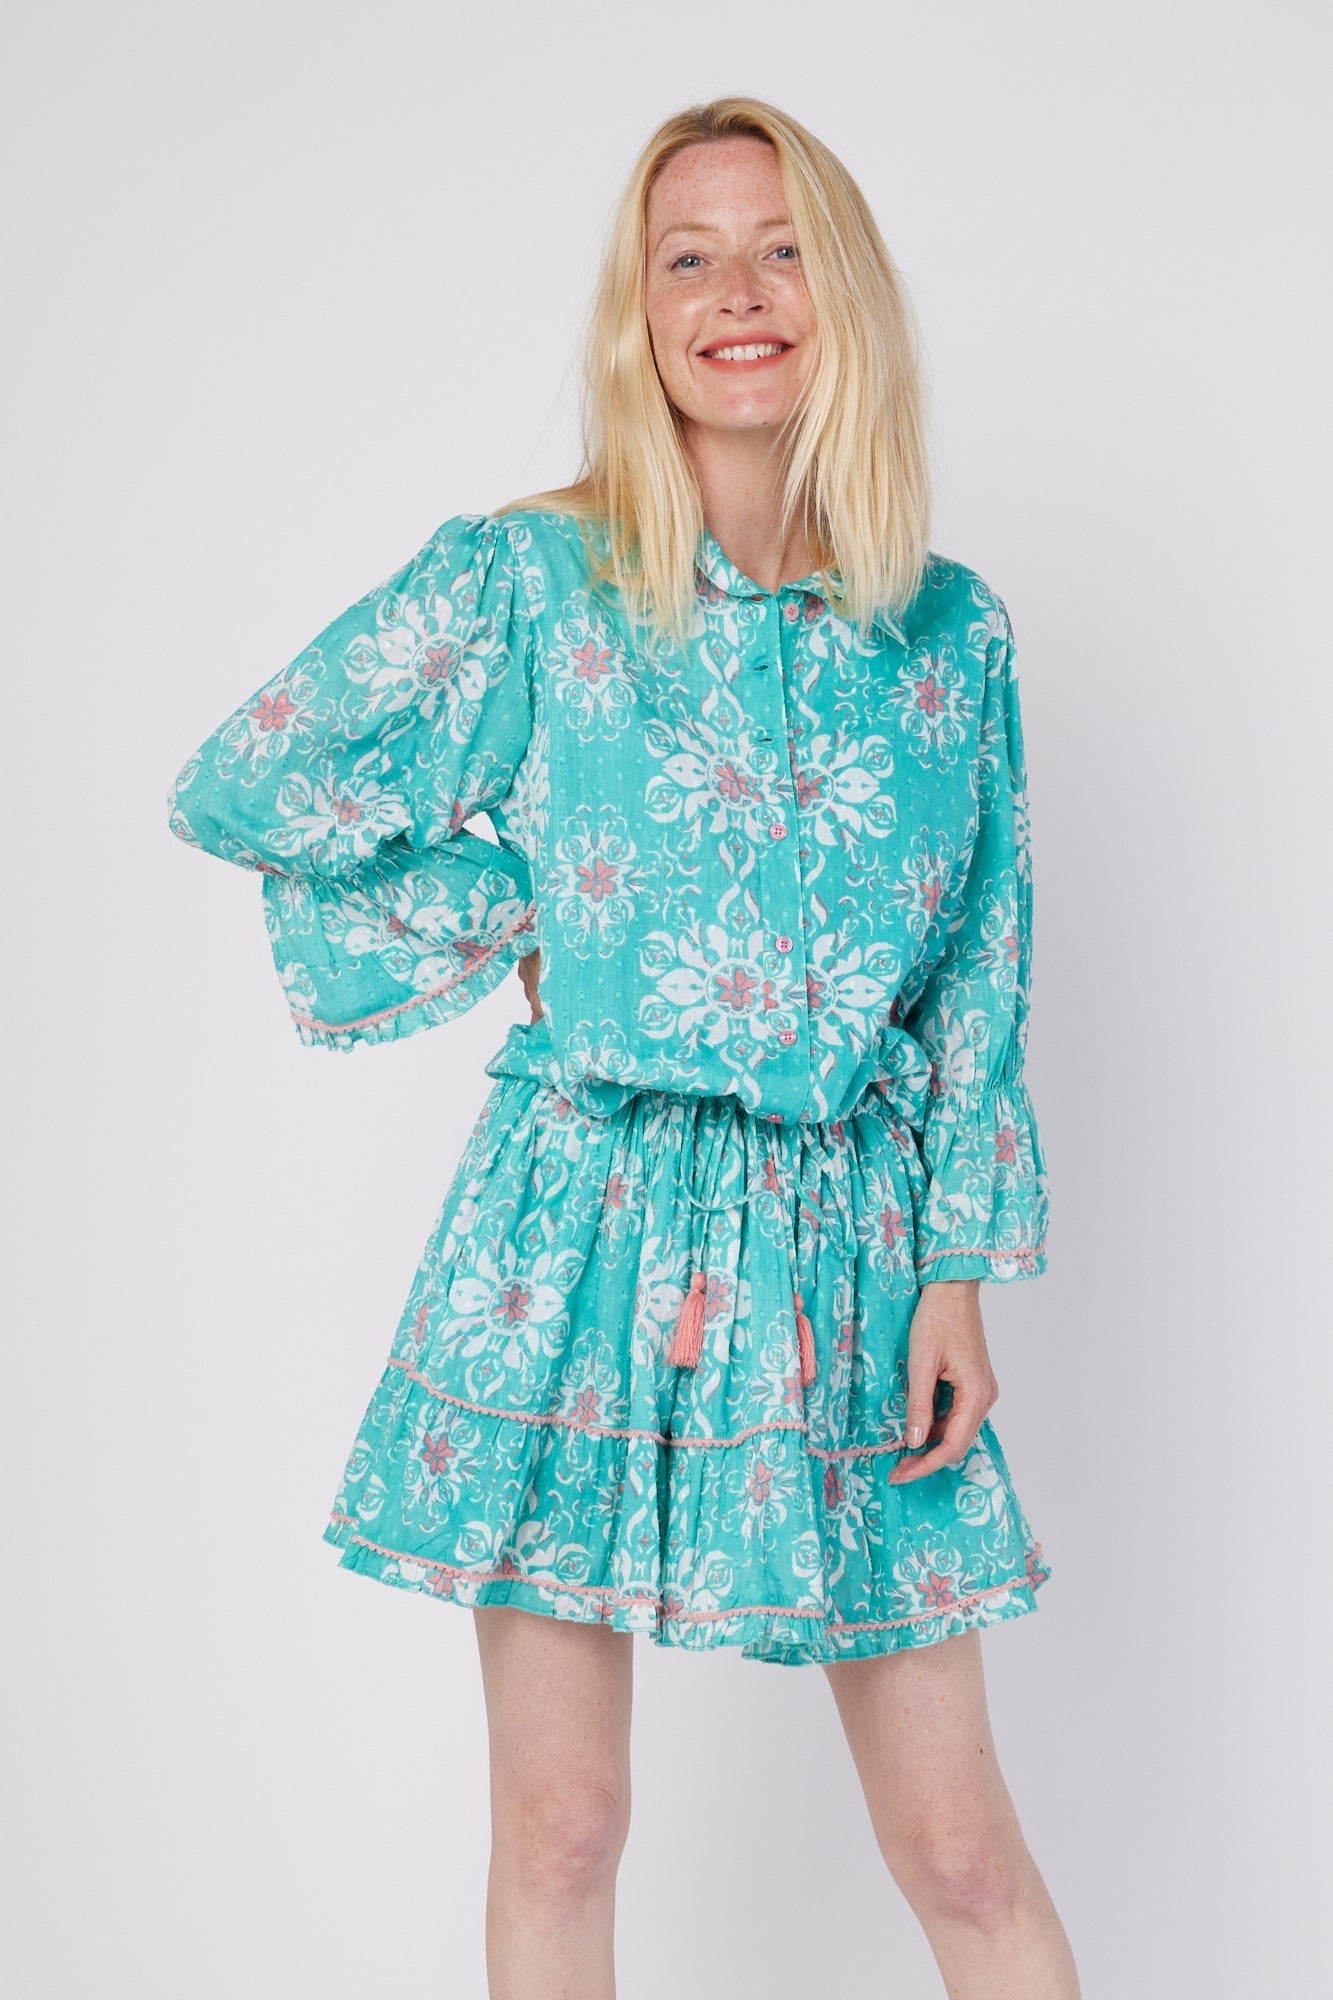 ModaPosa Penelope 3/4 Frill Puff Sleeve Drop Waist Mini Dress with Pockets in French Majolica . Discover women's resort dresses and lifestyle clothing inspired by the Mediterranean. Free worldwide shipping available!